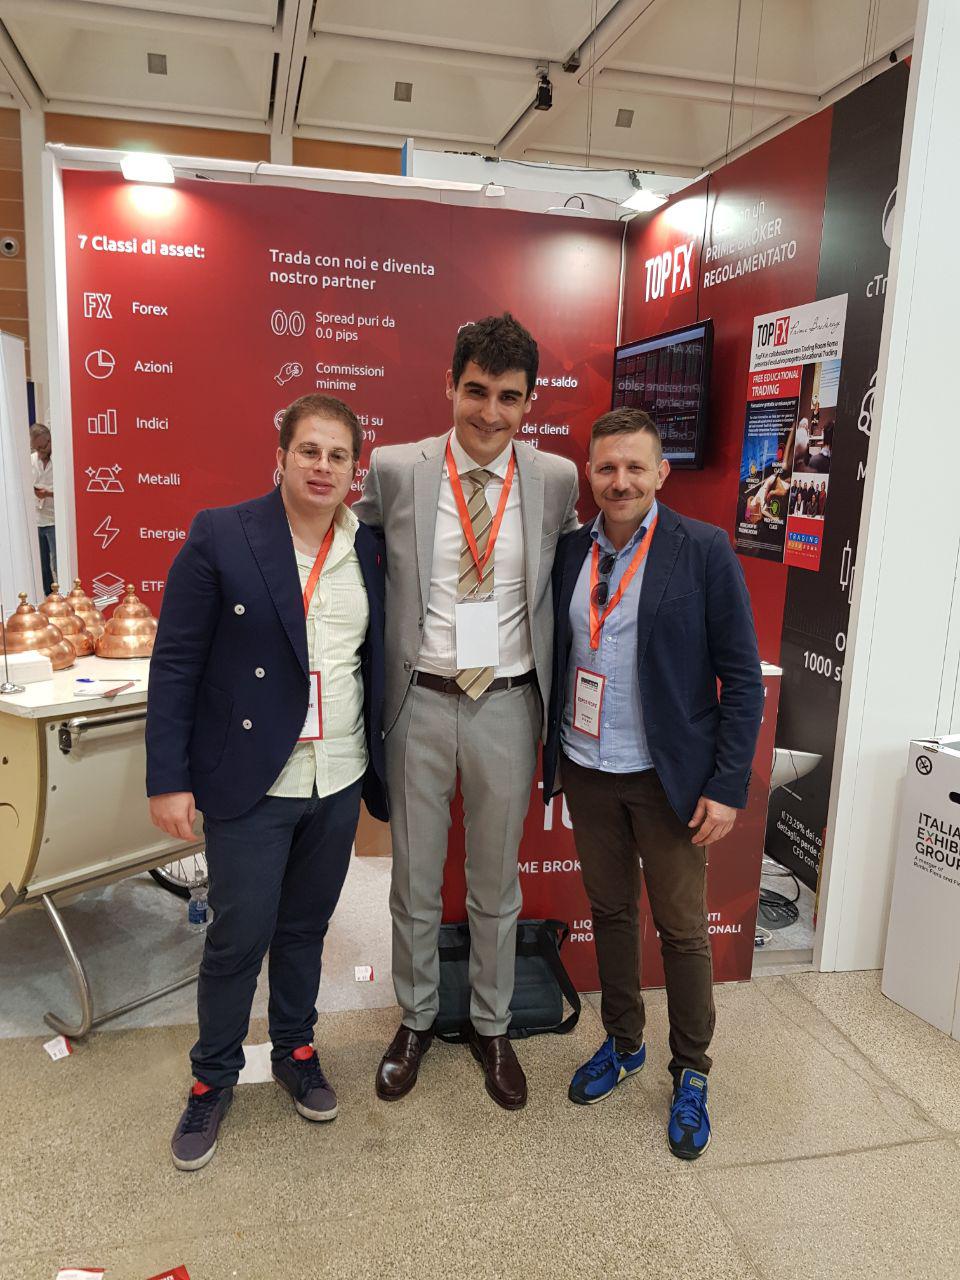 TopFX attends the 2019 IT Forum in Rimini: The CEO, Alex Katsaros and Head of Global Sales, Costantino Zenonos, at our booth.